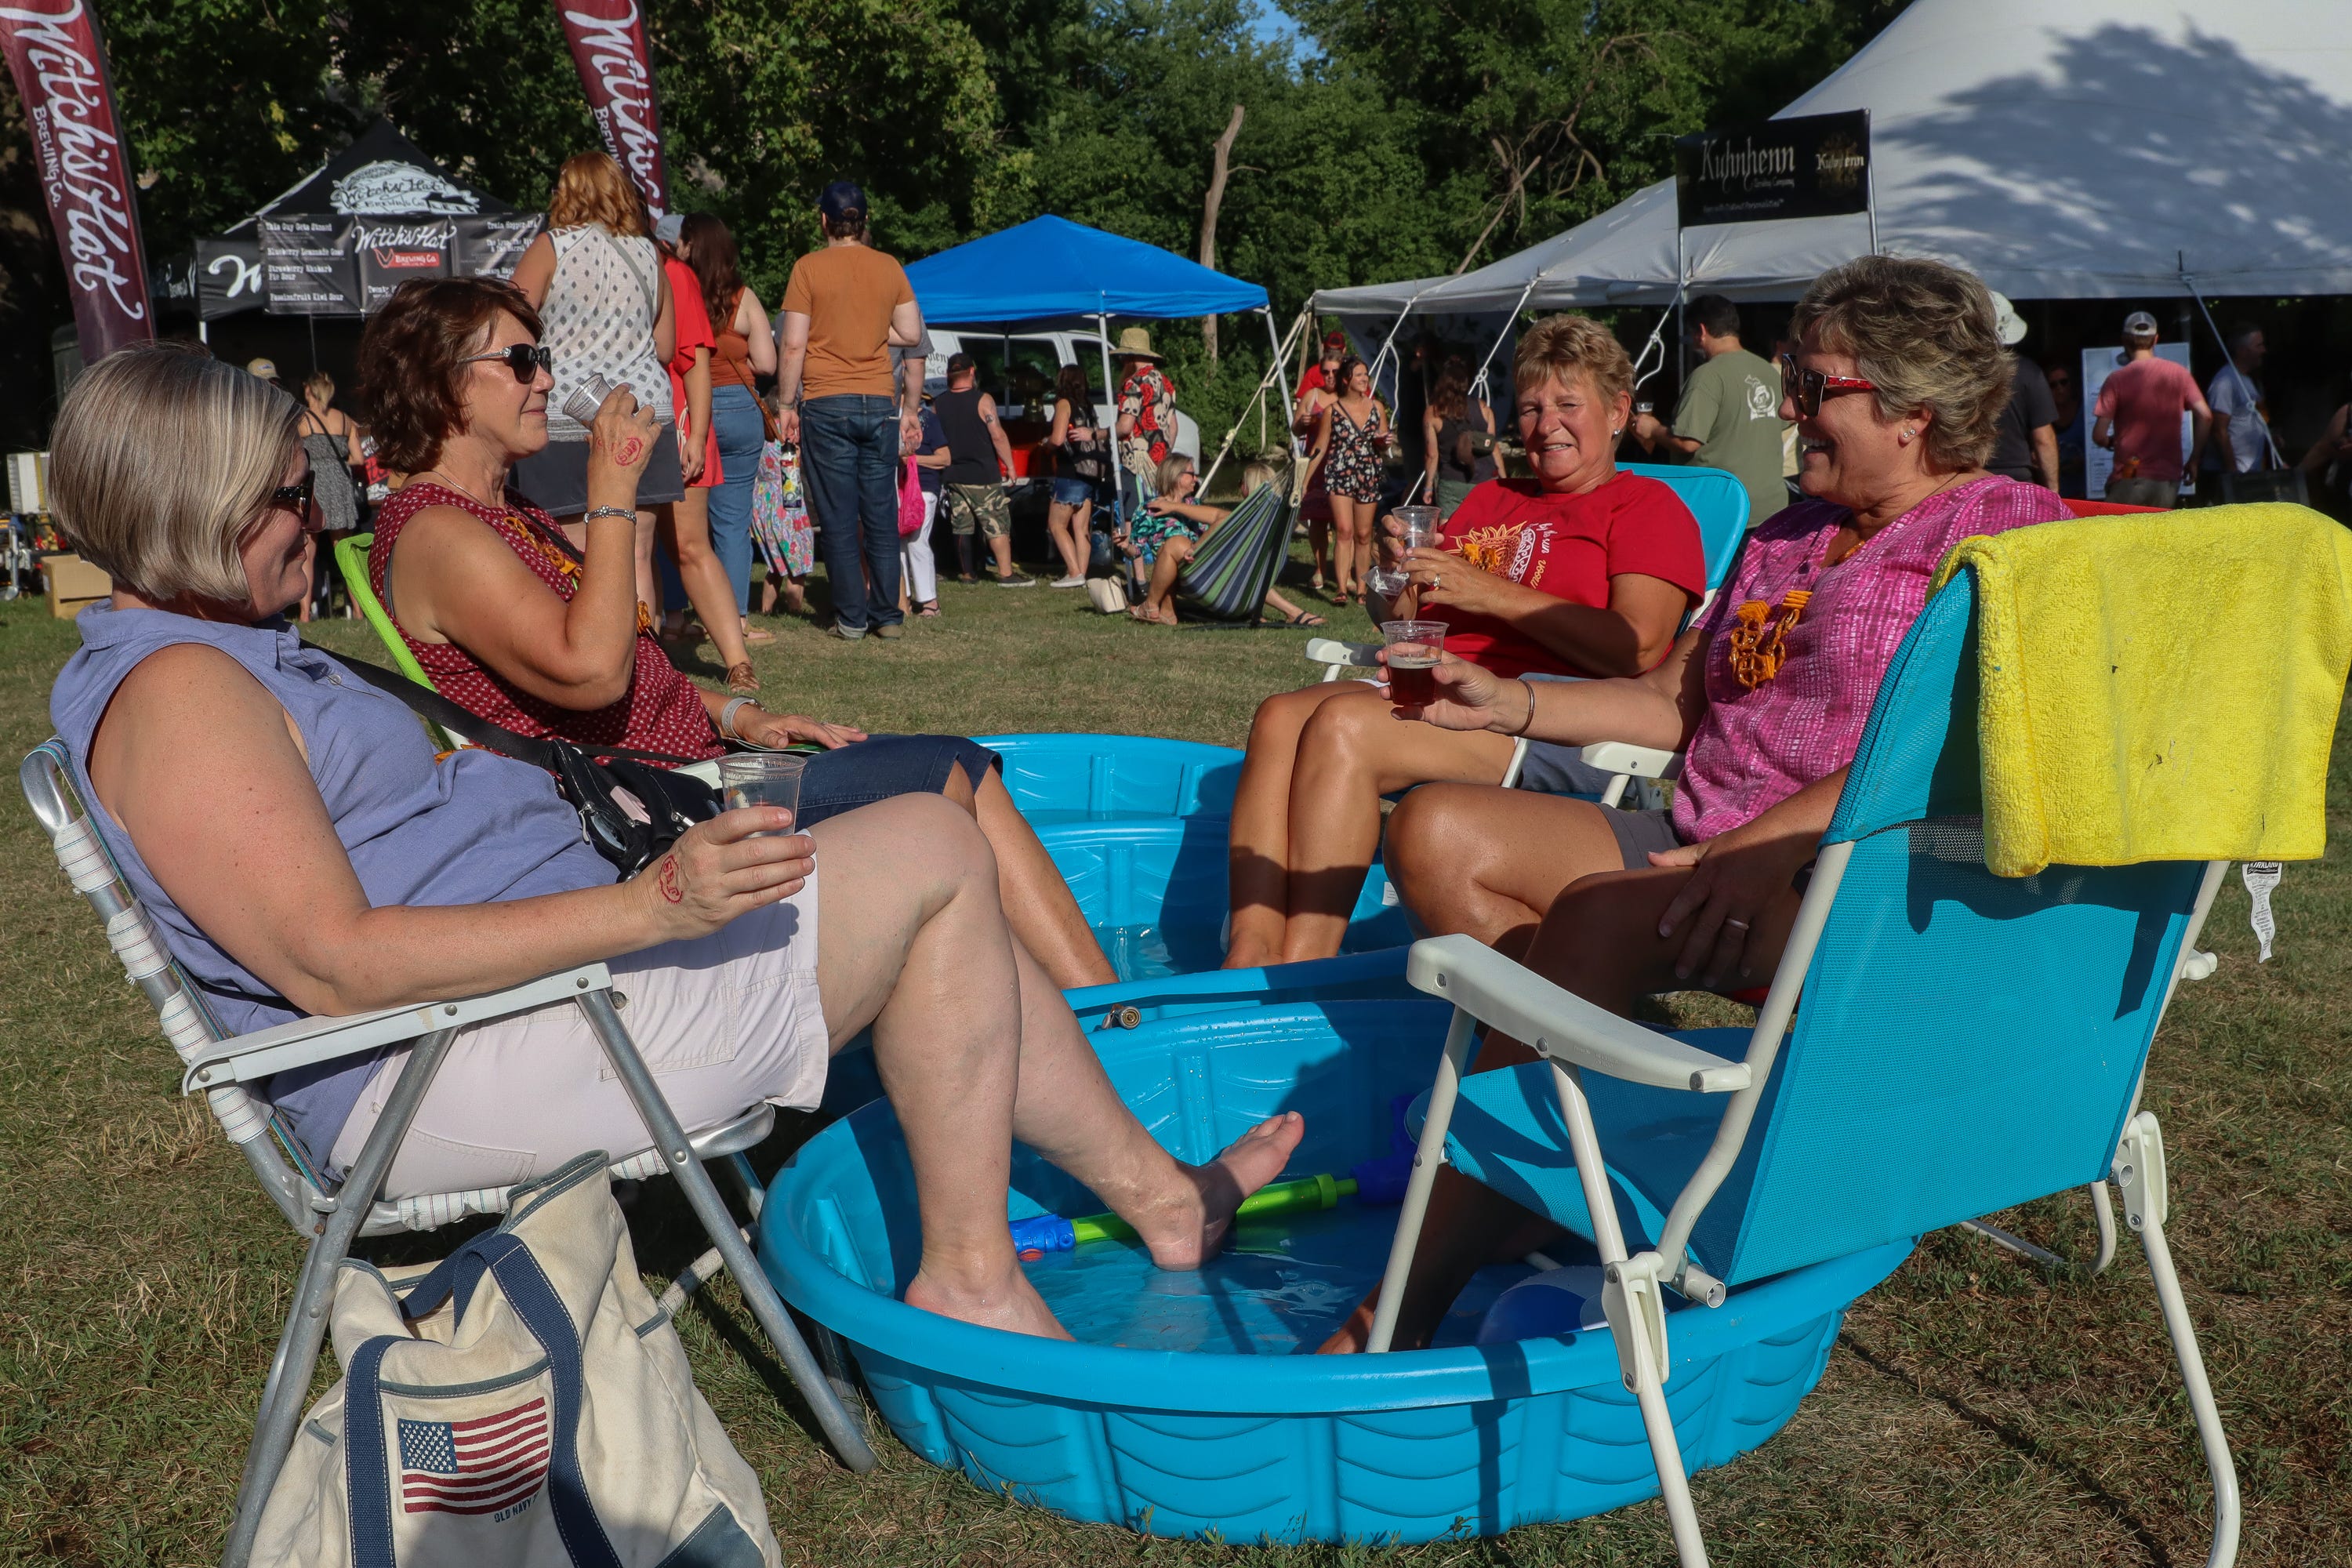 Left to right: Sharon Fries, Mary Spitzley, Marianne Turner and Connie Poremba, all of Canton, cool their heels at the Michigan Brewers Guild Summer Beer Festival Friday in Ypsilanti's Riverside Park.